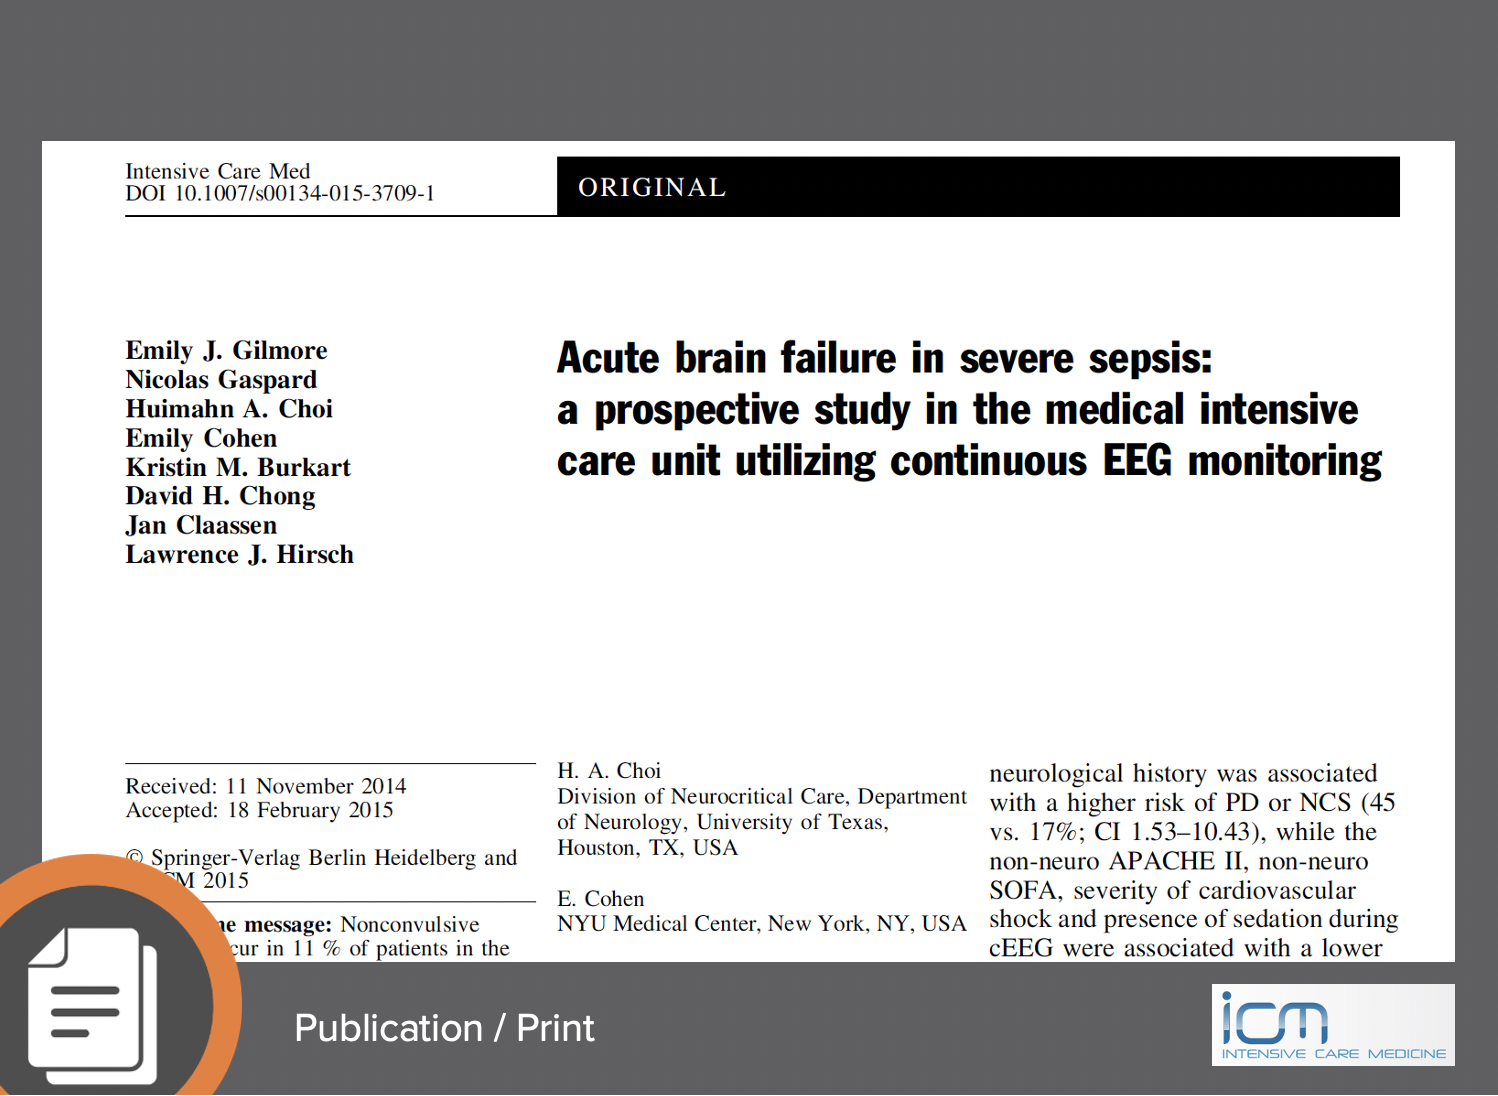 Acute Brain Failure in Severe Sepsis: A Prospective Study in the Medical Intensive Care Unit Utilizing Continuous EEG Monitoring